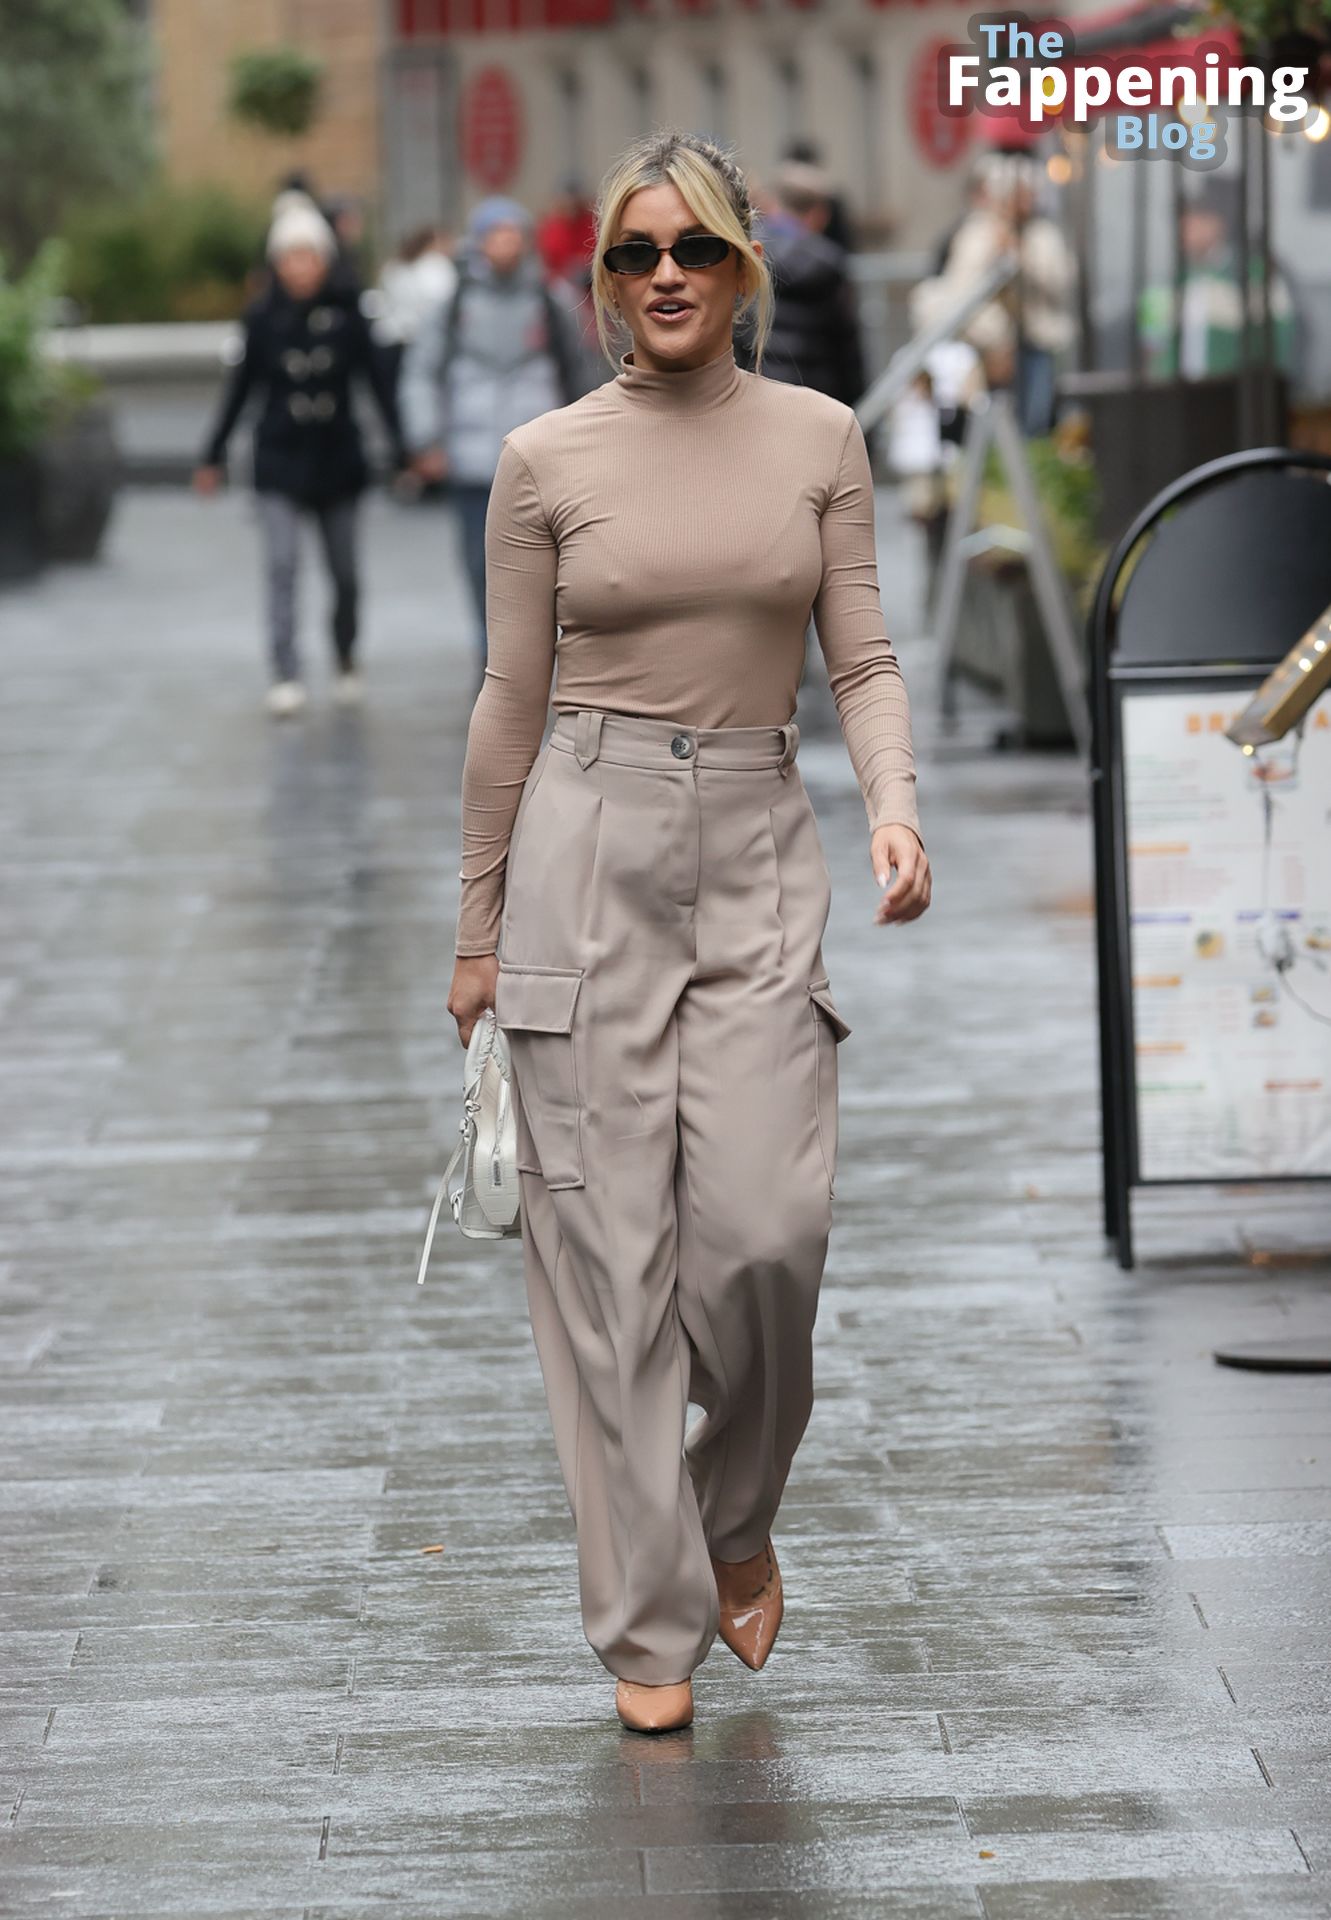 Ashley Roberts Shows Her Pokies Stepping Out in London (8 Photos)